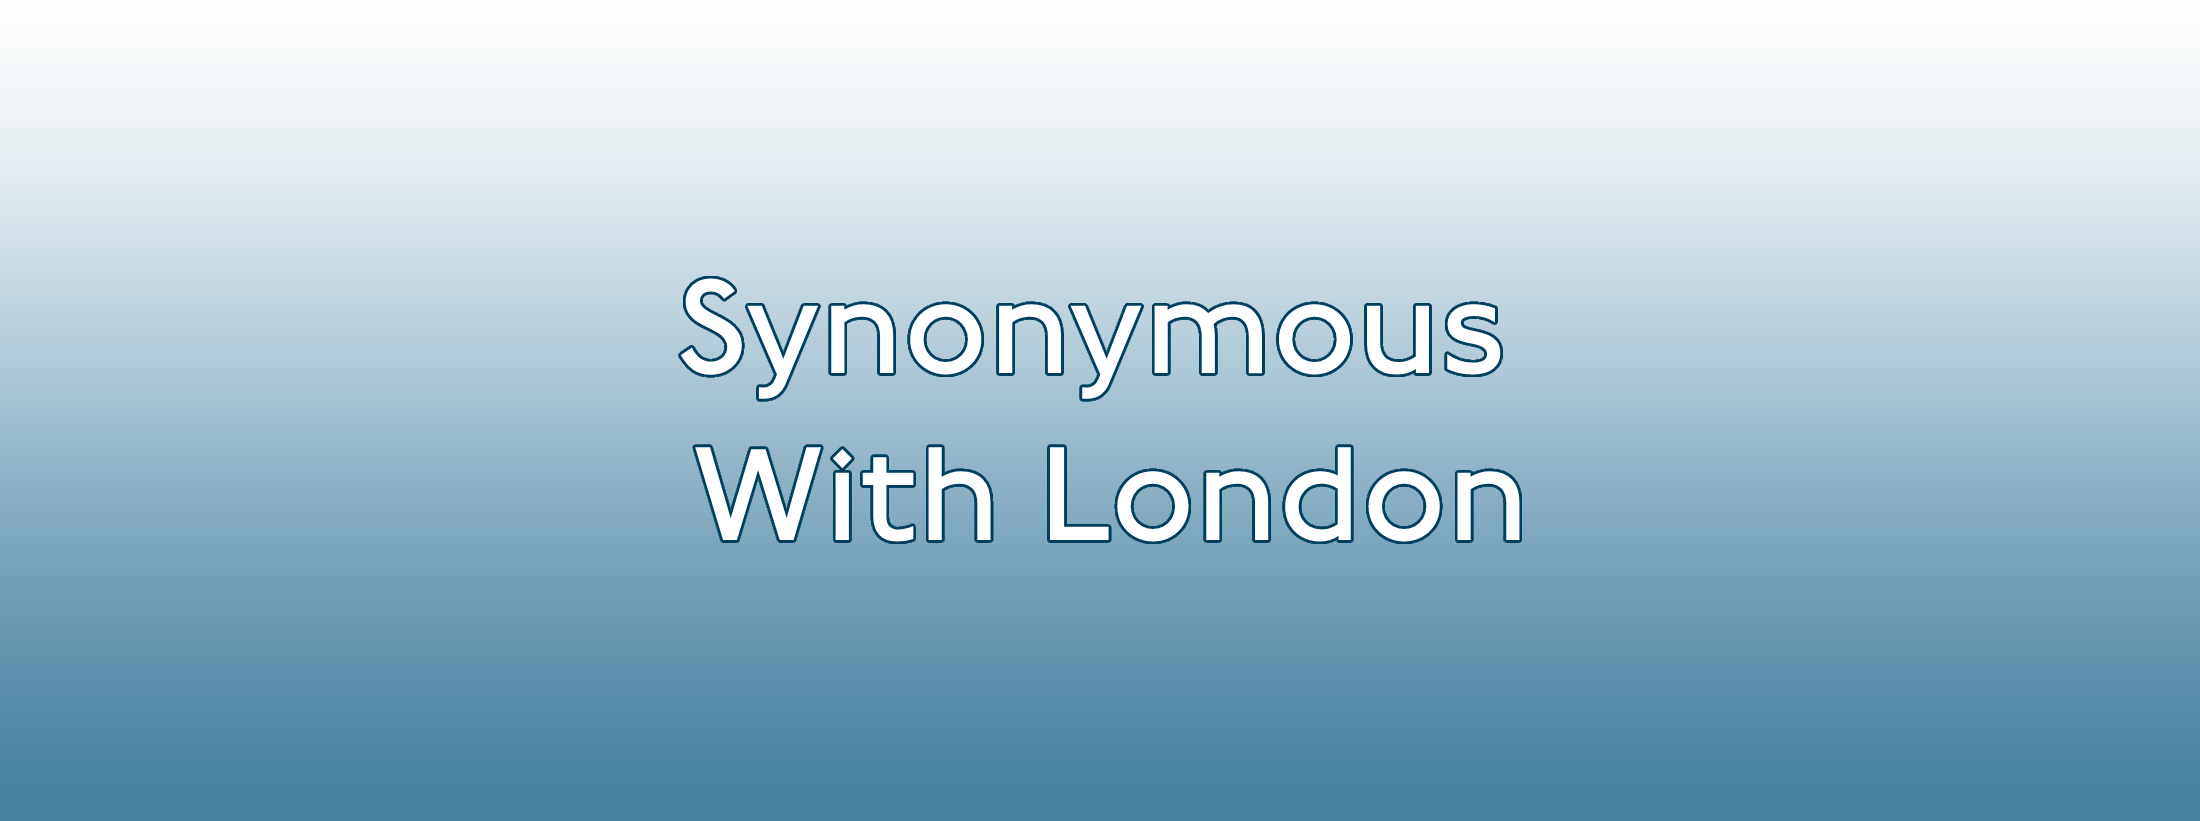 Johnston: Synonymous With London